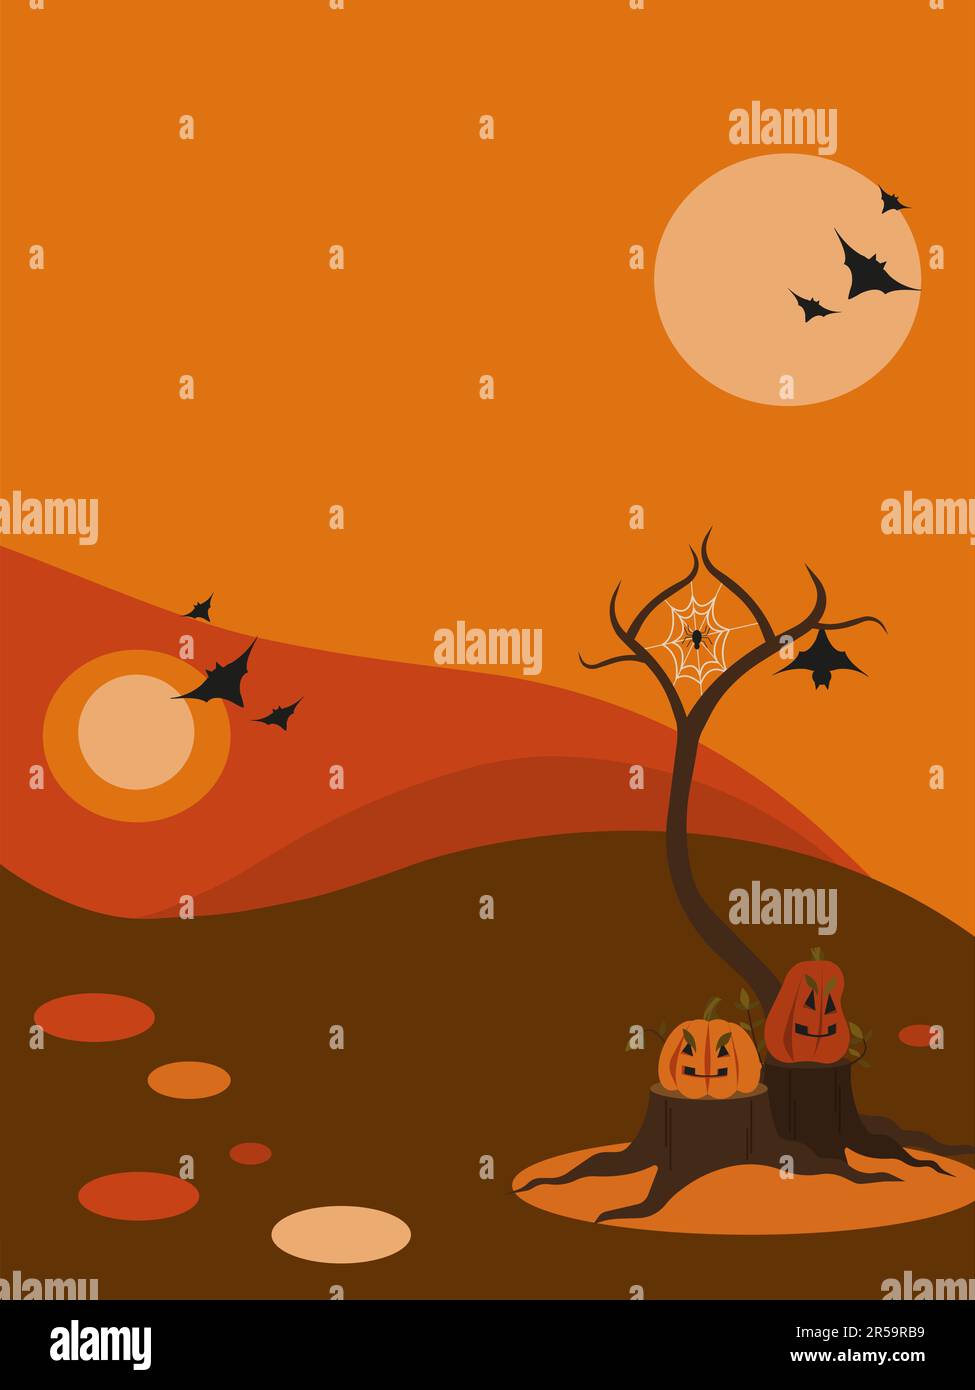 Vertical halloween scene. Pumpkins on stumps, autumn tree without leaves, spider on a web, bats. Autumn landscape, orange, red and brown colors. Flat Stock Vector